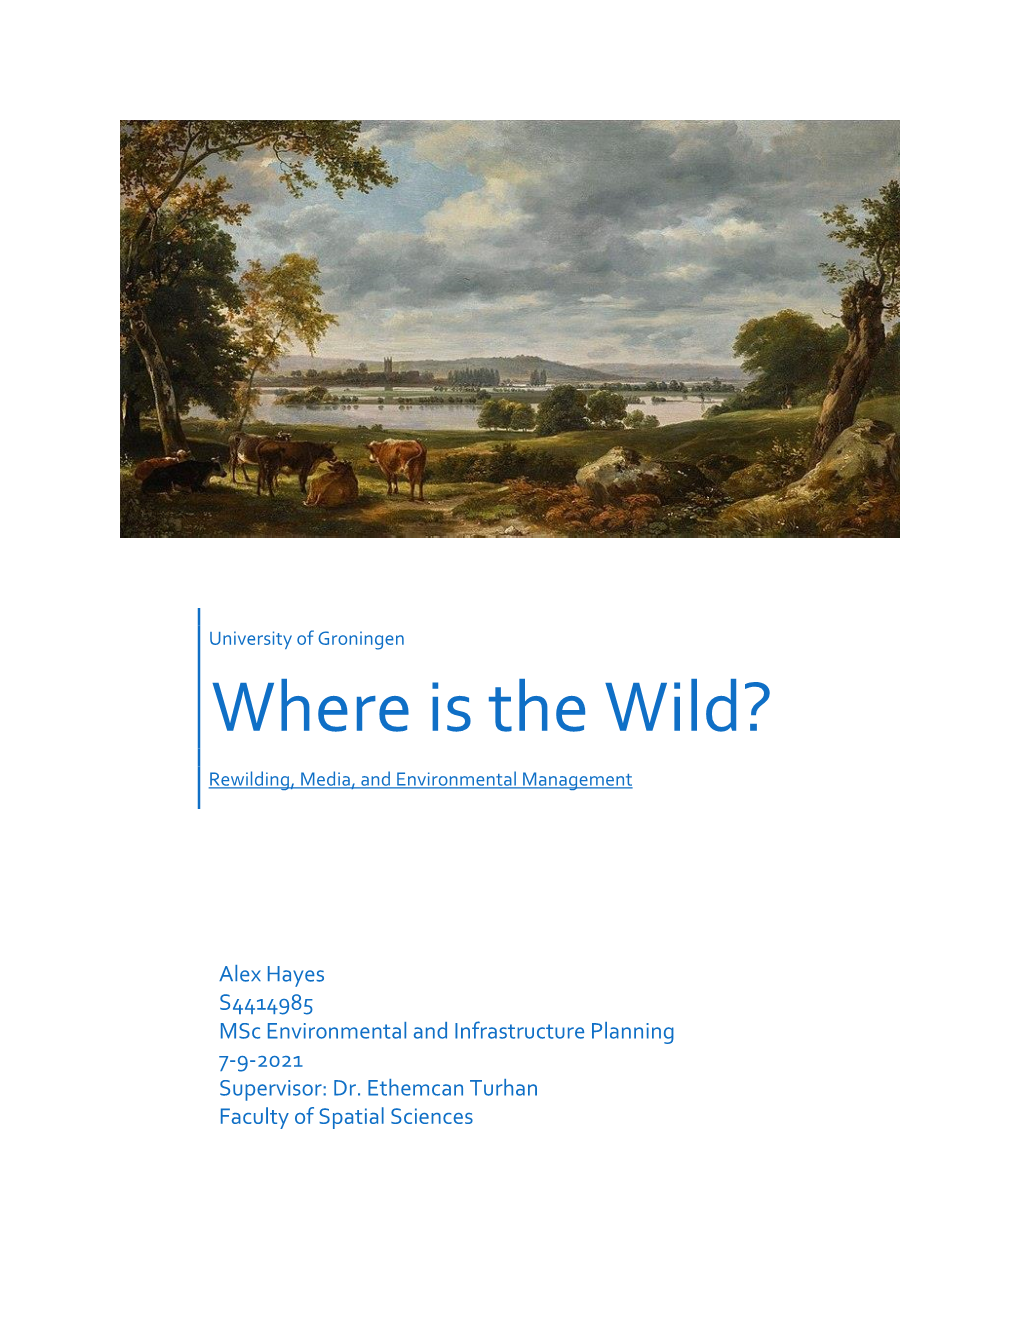 Where Is the Wild?